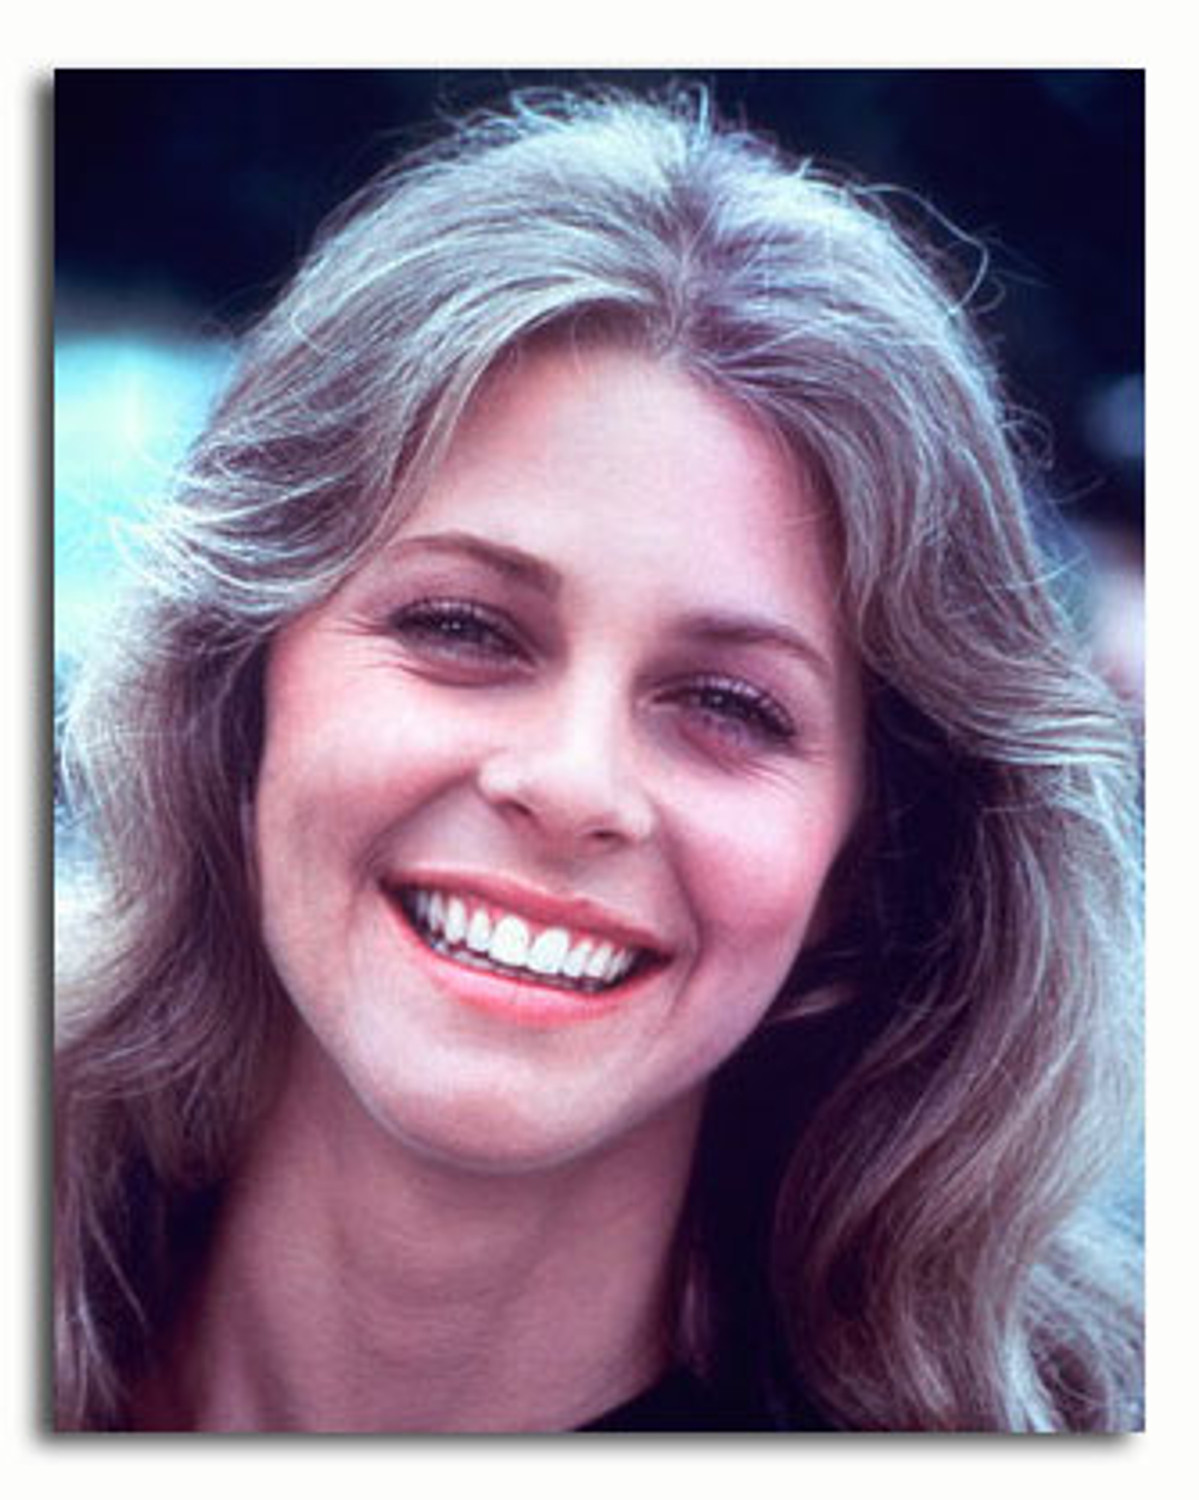 SS3575442) Movie picture of Lindsay Wagner buy celebrity photos